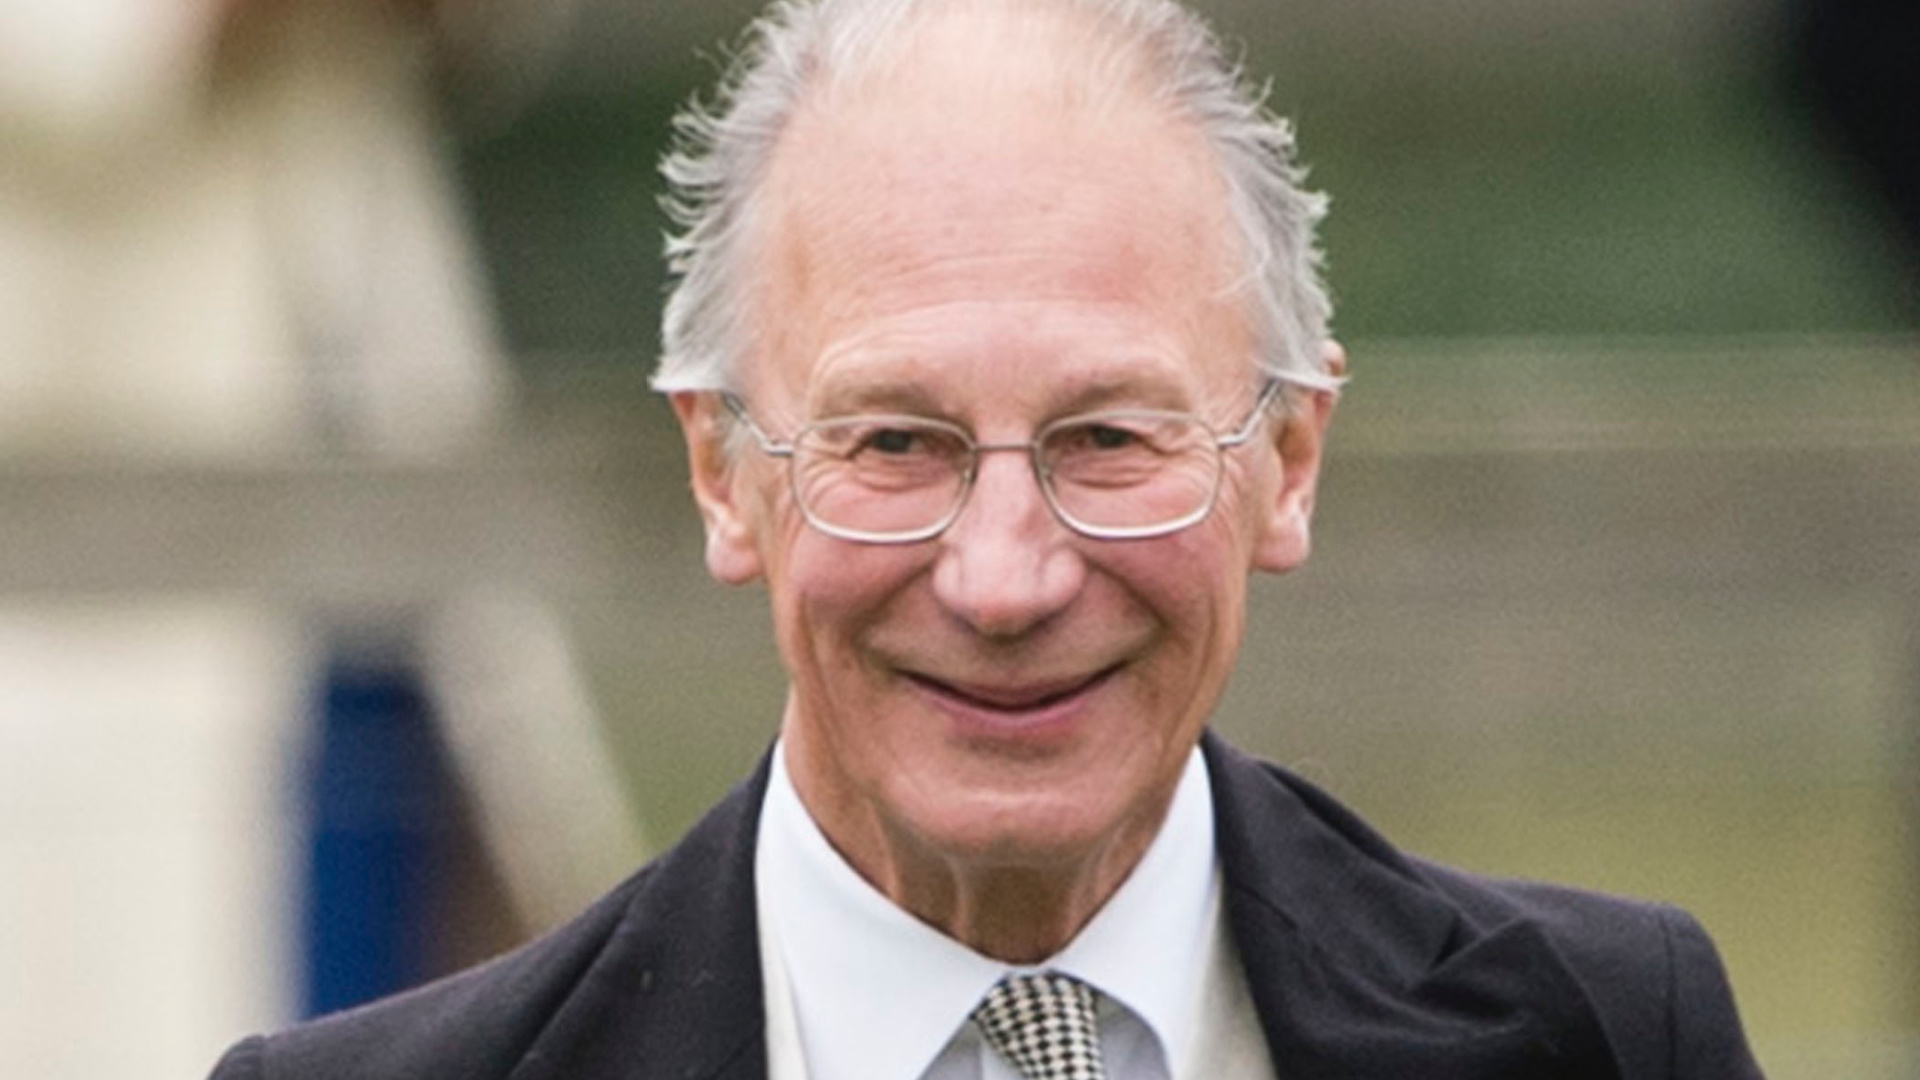 Lord Fellowes, William and Harry’s uncle, dies at 82